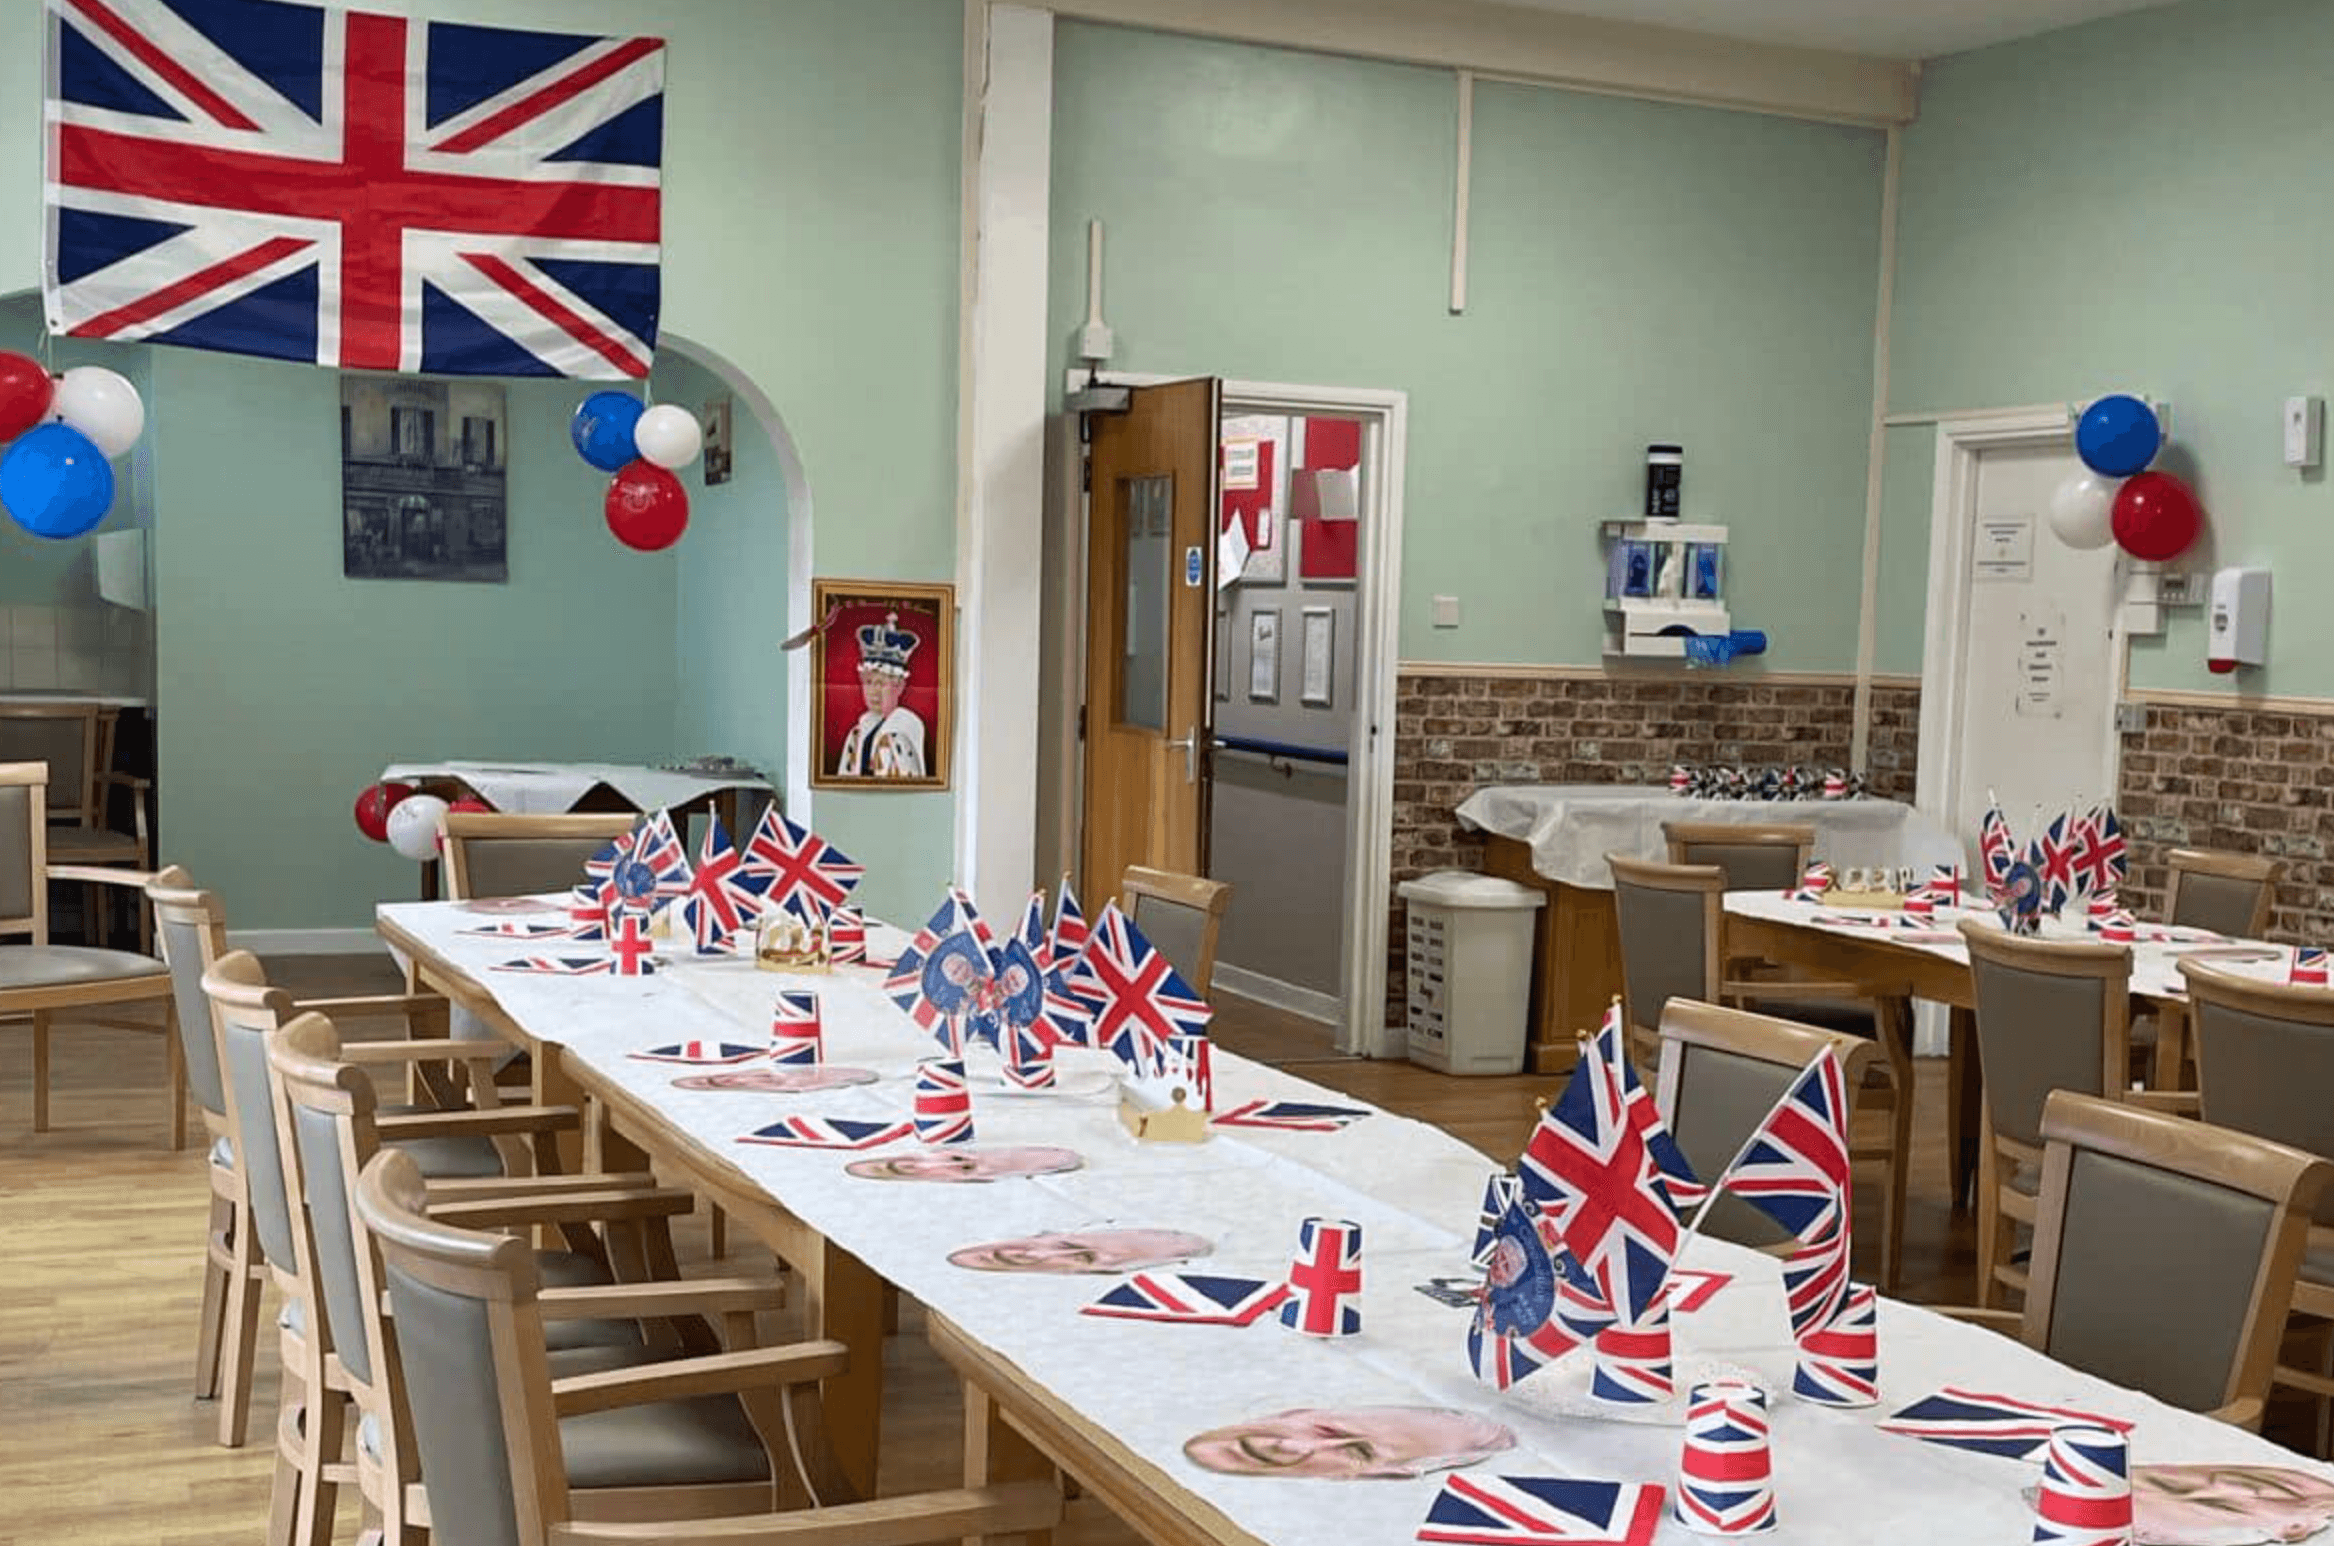 Dining room of Abbey House care home in Leicester